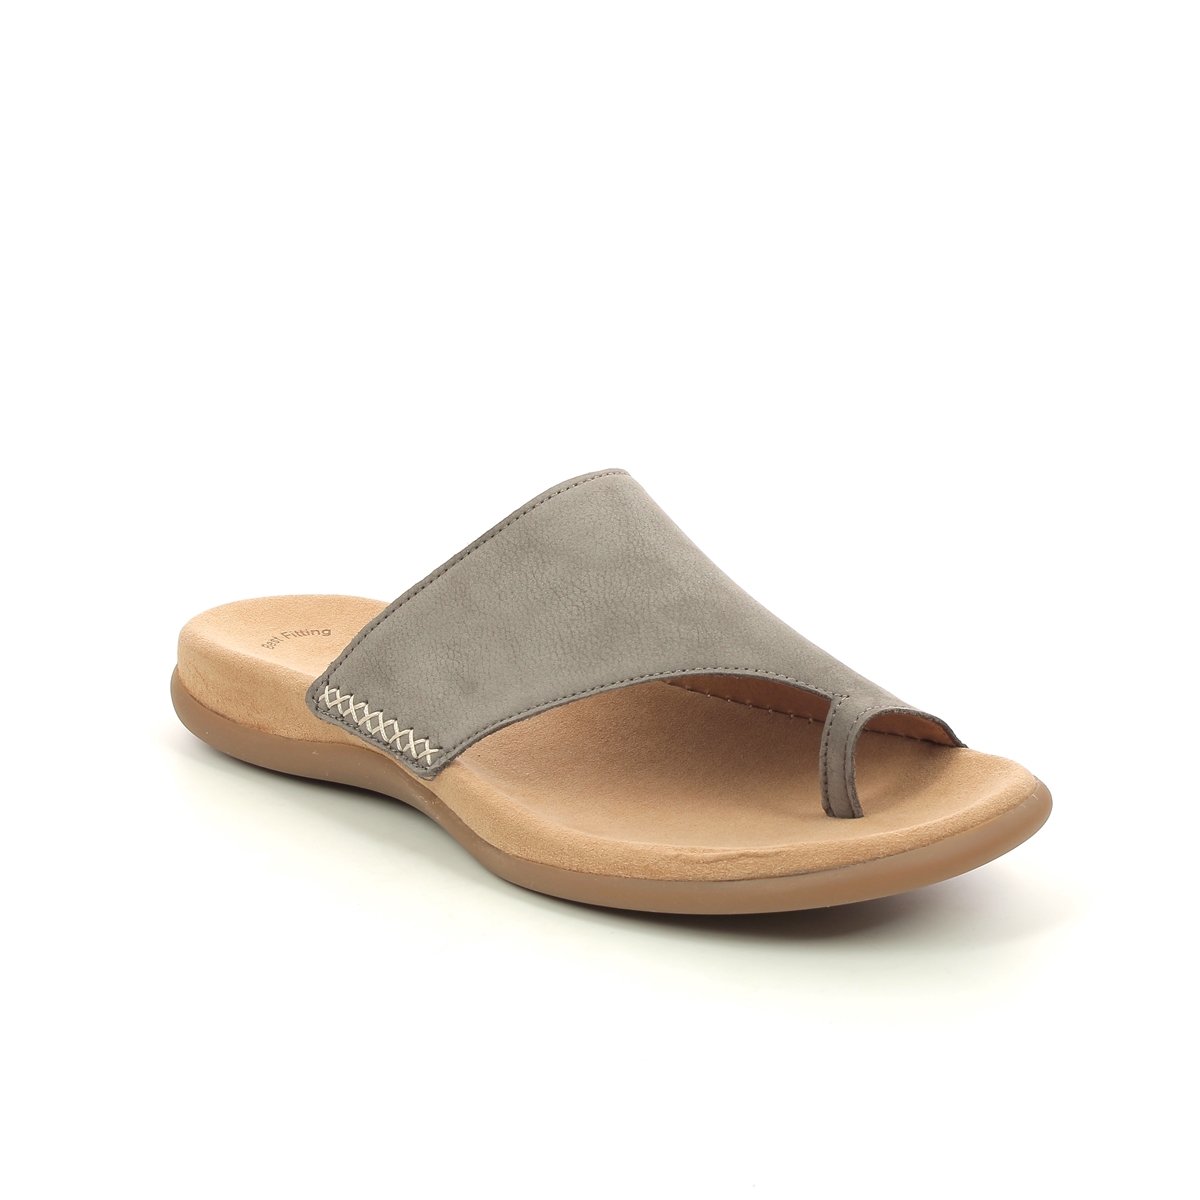 Gabor Lanzarote Taupe nubuck Womens Toe Post Sandals 03.700.13 in a Plain Leather in Size 41